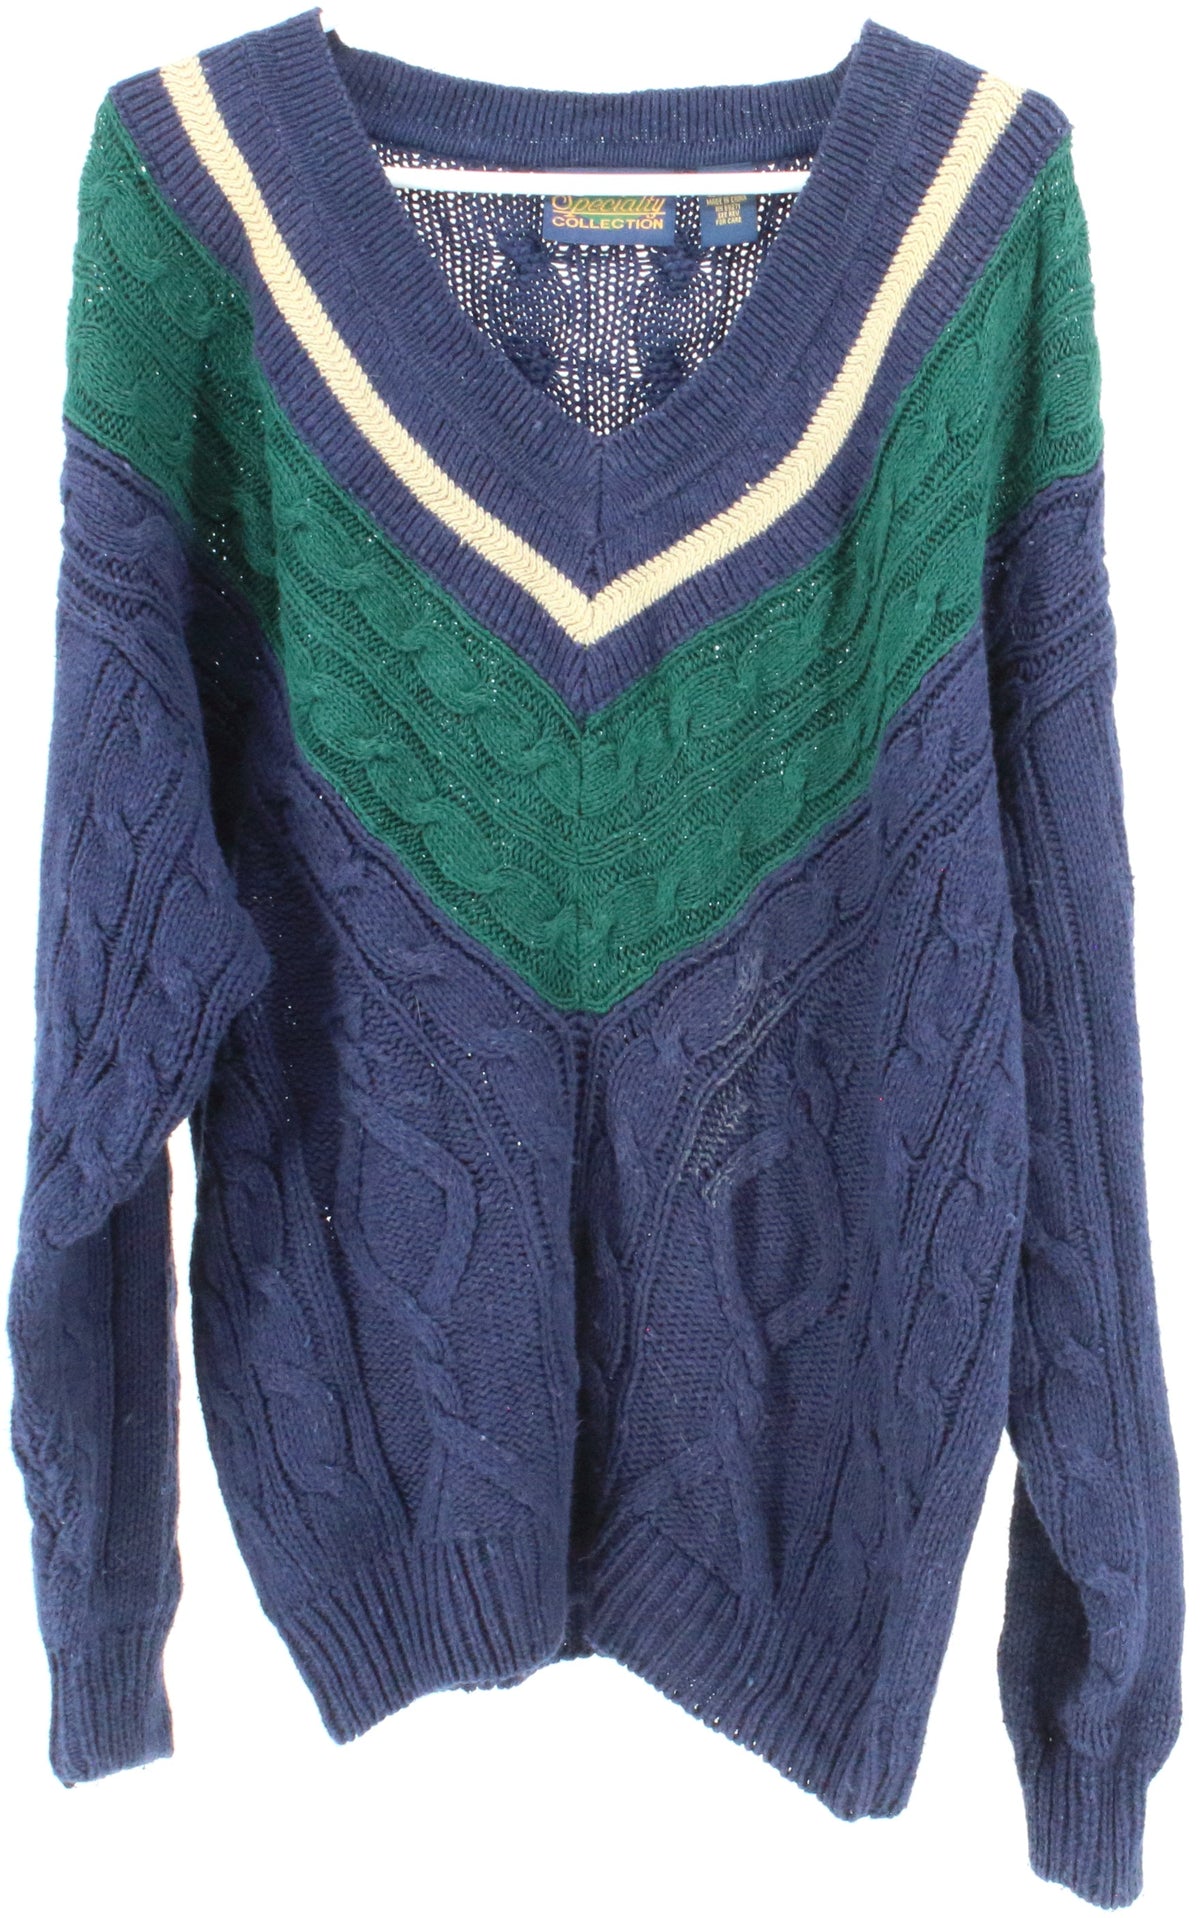 Specialty Collection Navy Blue Green and Beige V Neck Sweater